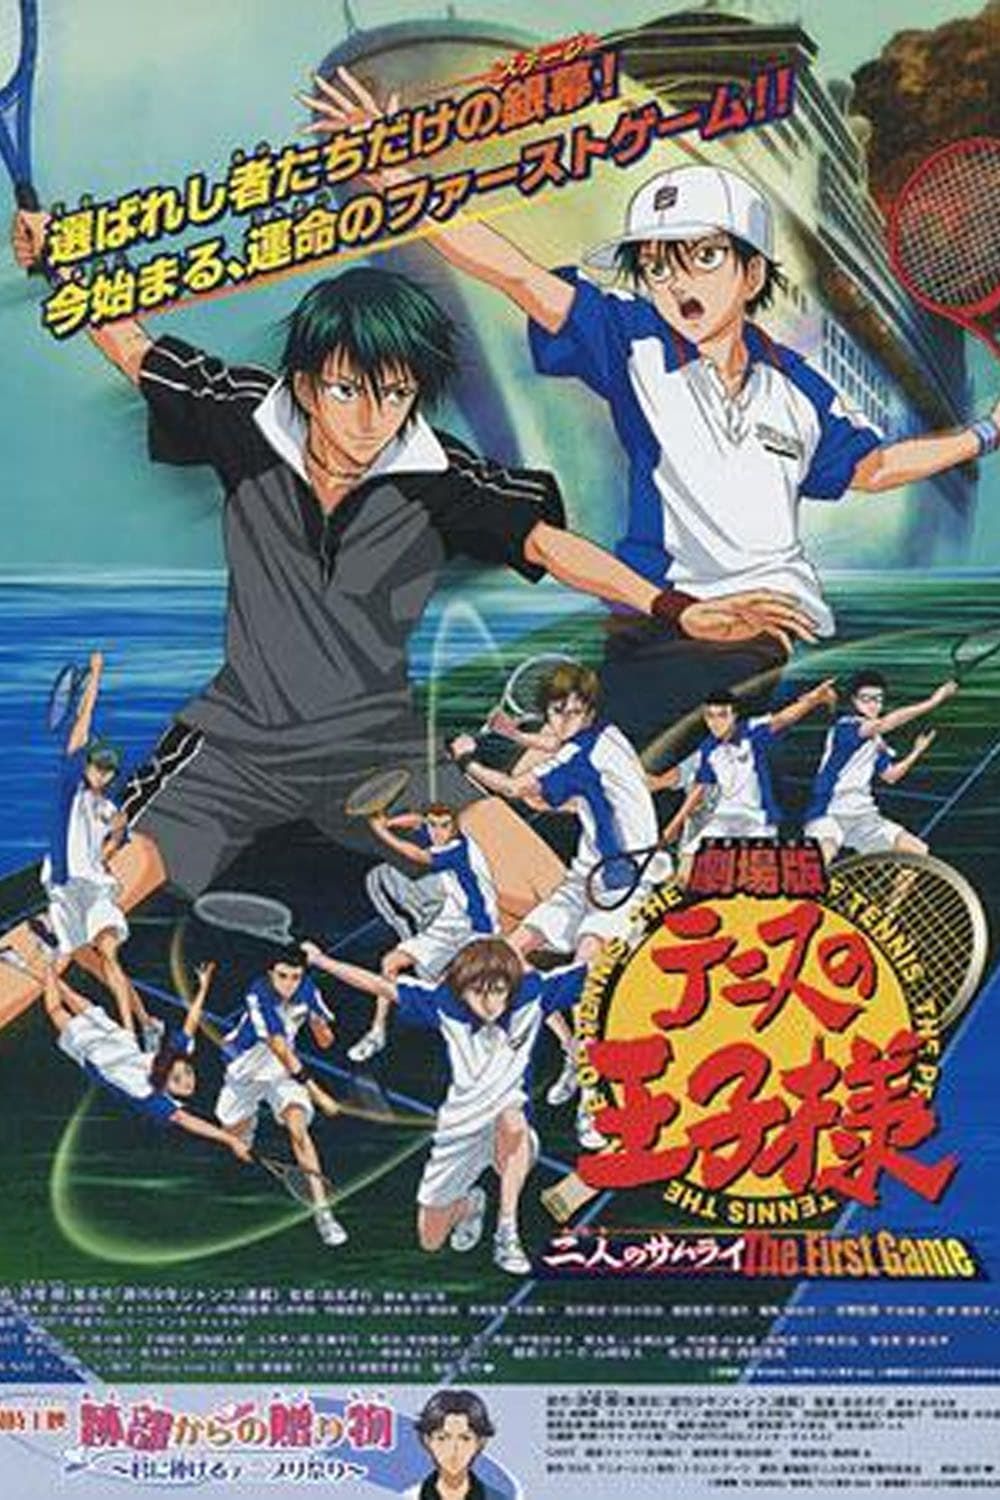 The Prince of Tennis - Two Samurai: The First Game (Movie) (Sub) New